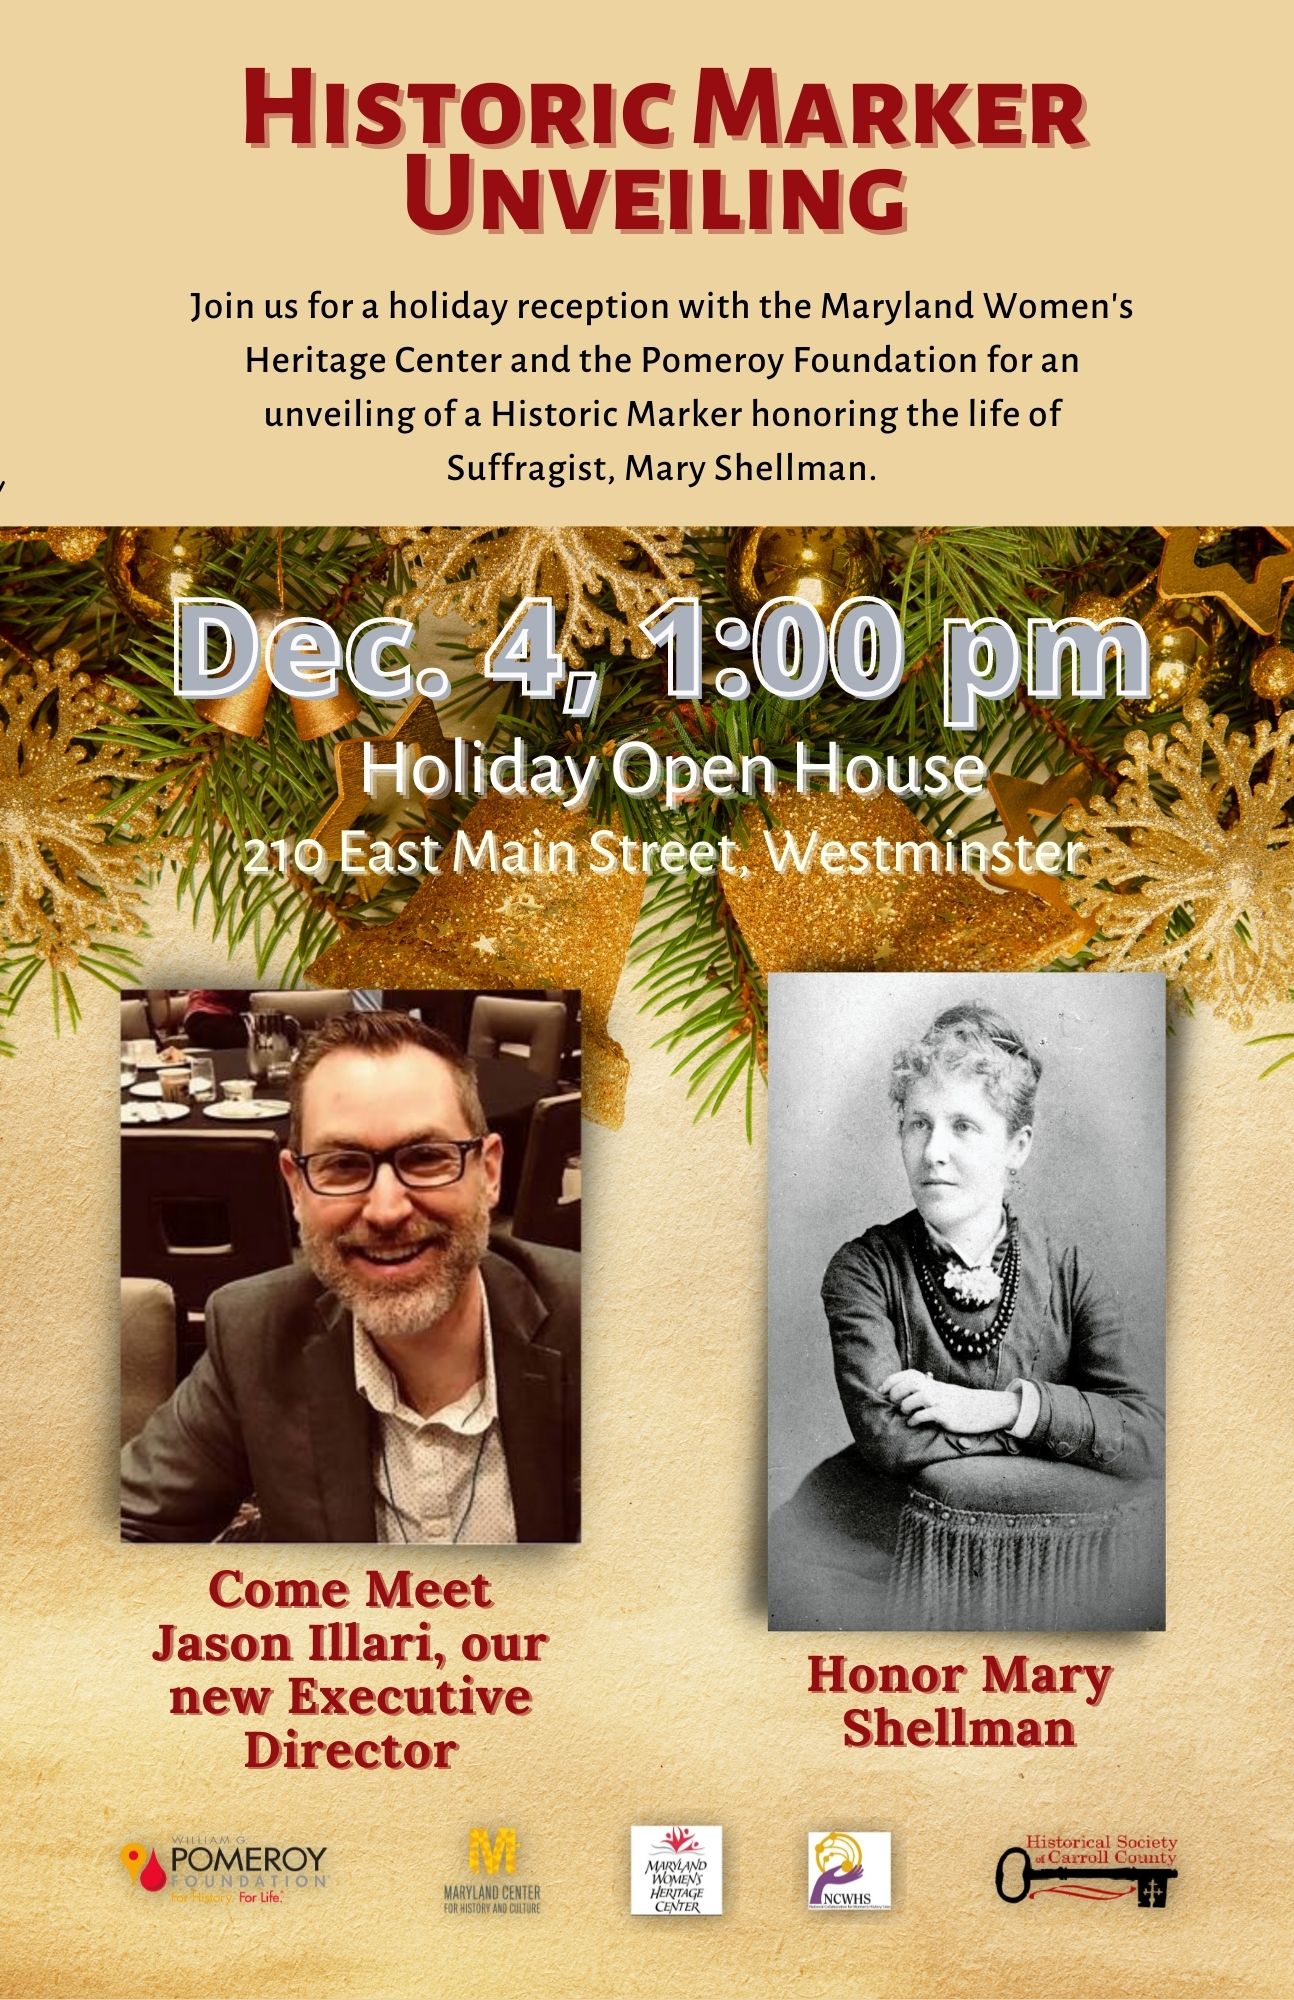 This flyer shows the details for the marker unveiling for Mary Shellman and includes a photo of the historical society's new director Jason Illari and a historical photo of Mary Shellman